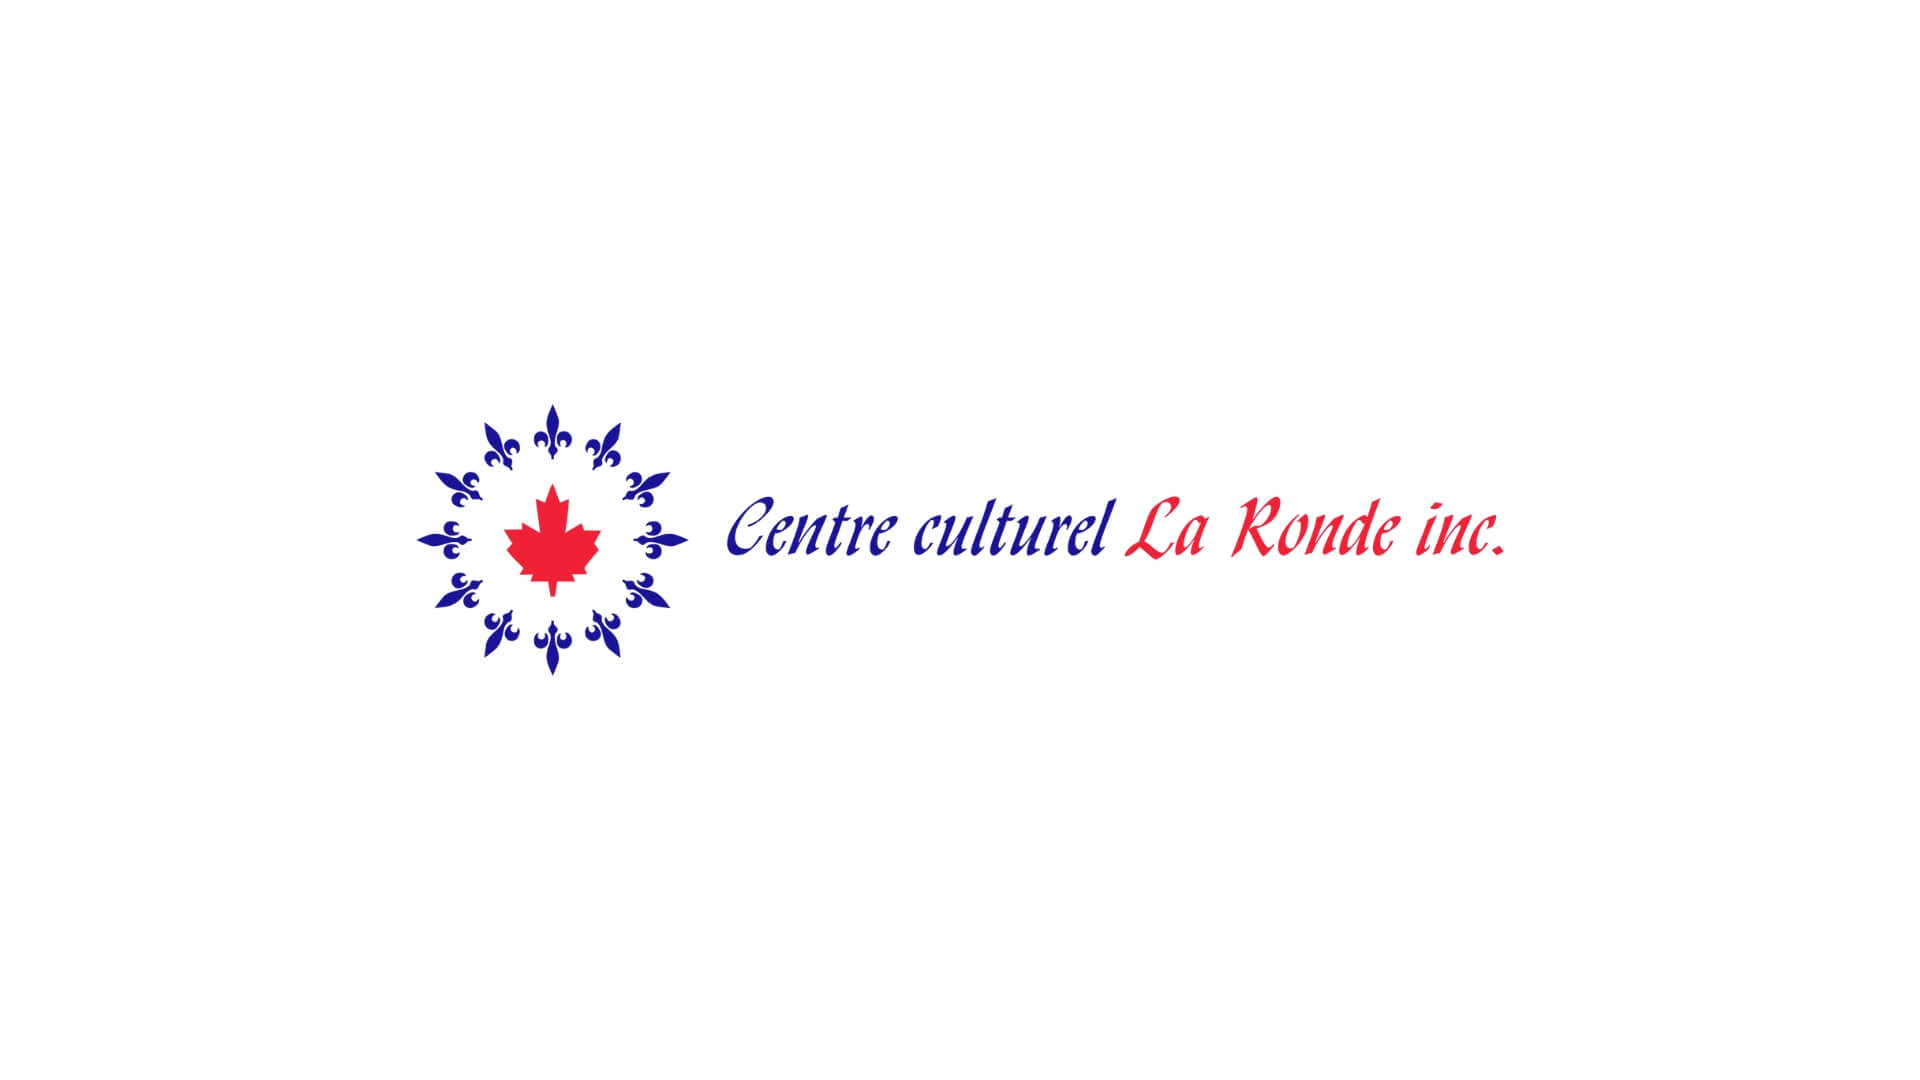 Timmins Care Logo of centre culturel la ronde inc featuring a blue and red floral emblem with a maple leaf in the center, flanked by the organization's name in blue text. Cochrane District Social Services Administration Board